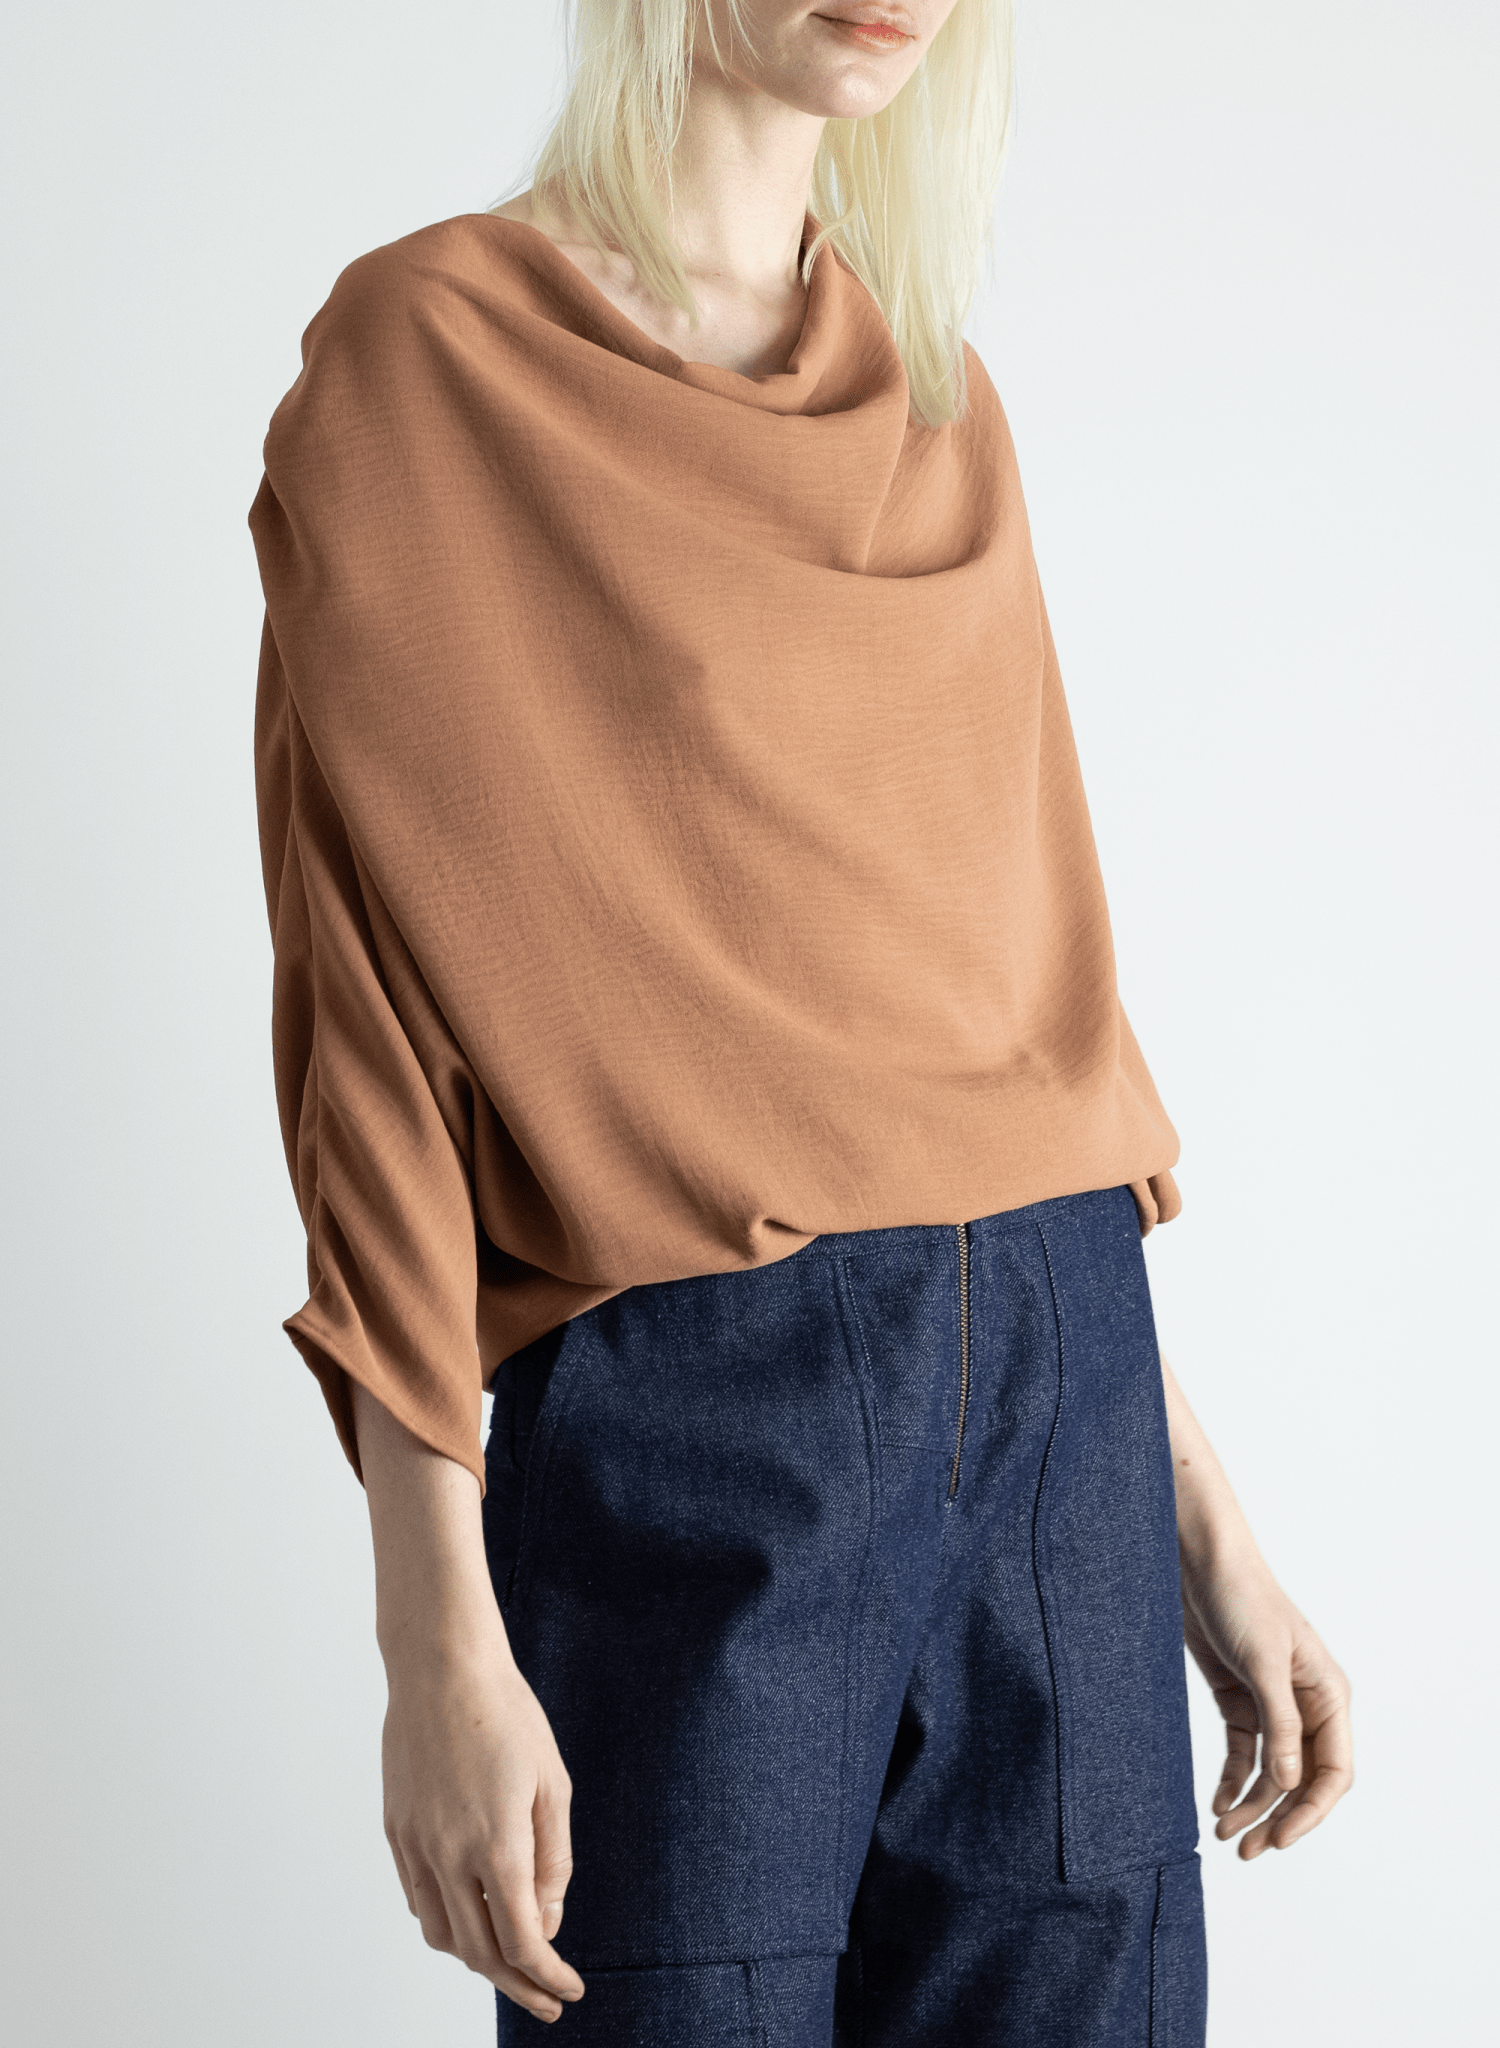 Abstraction Cowl Top - Latte - Meg Canada